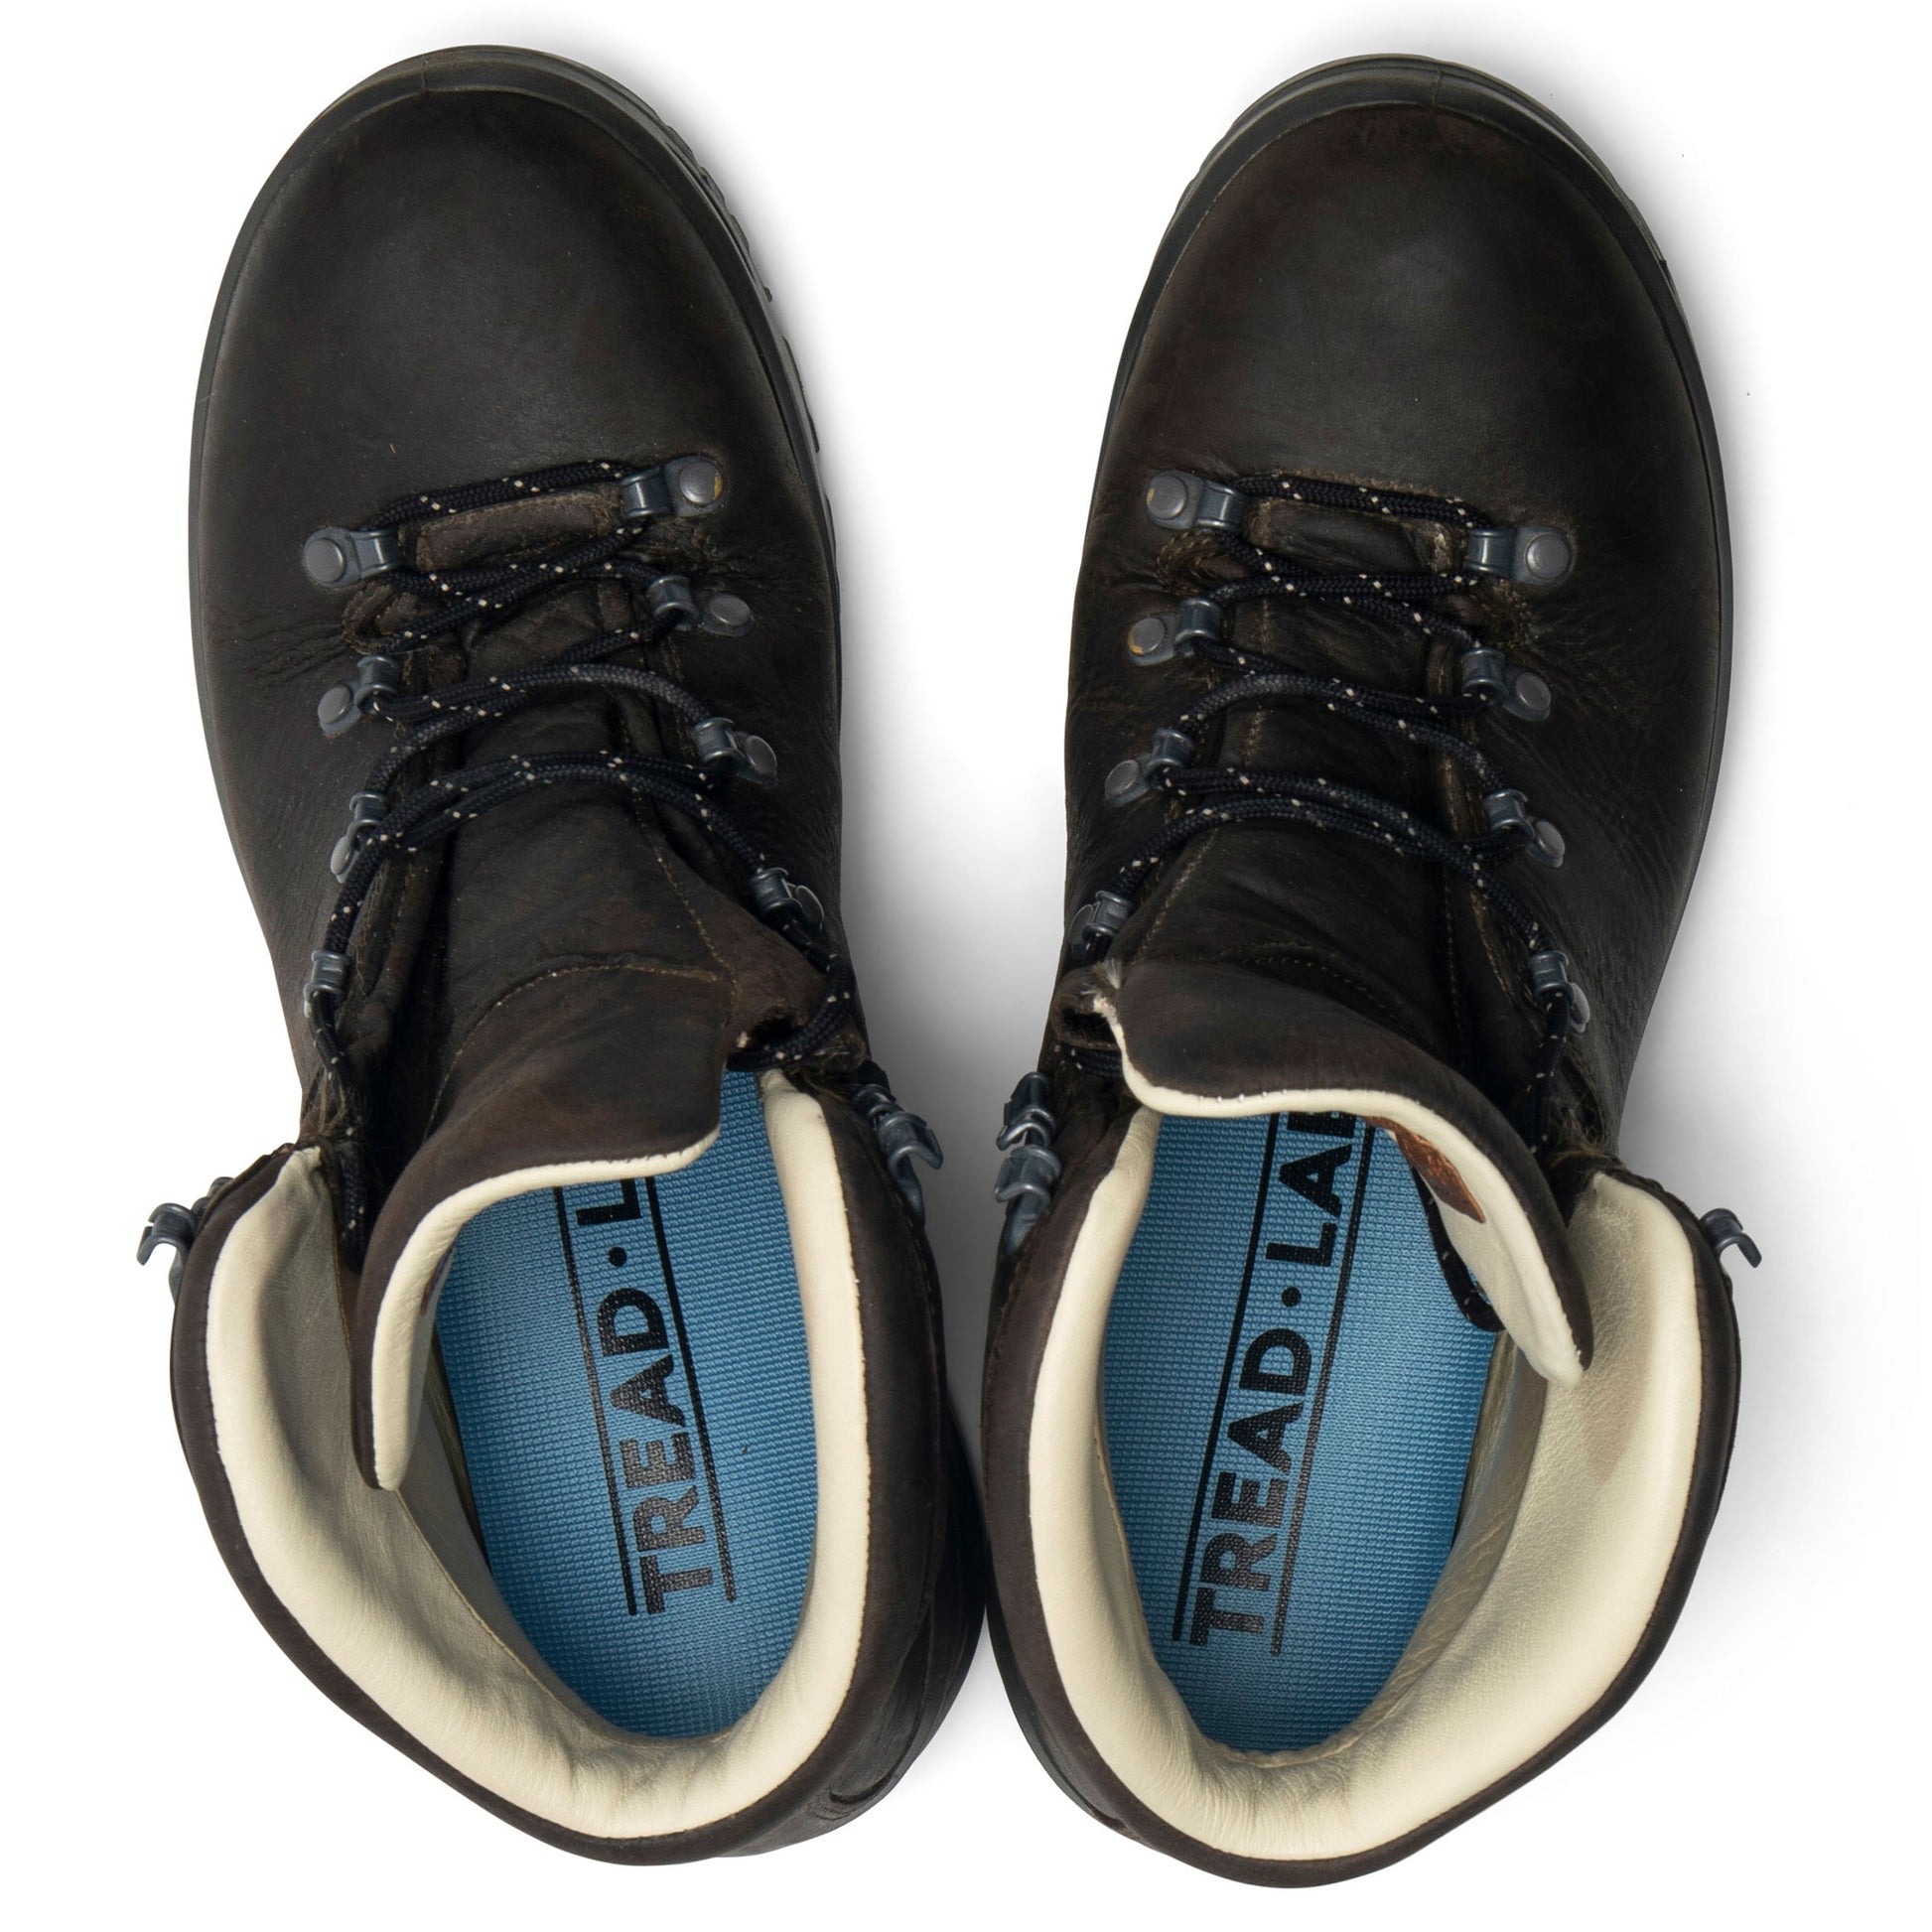 Pace Pain Relief Insole For Hiking Boots and Work Boots